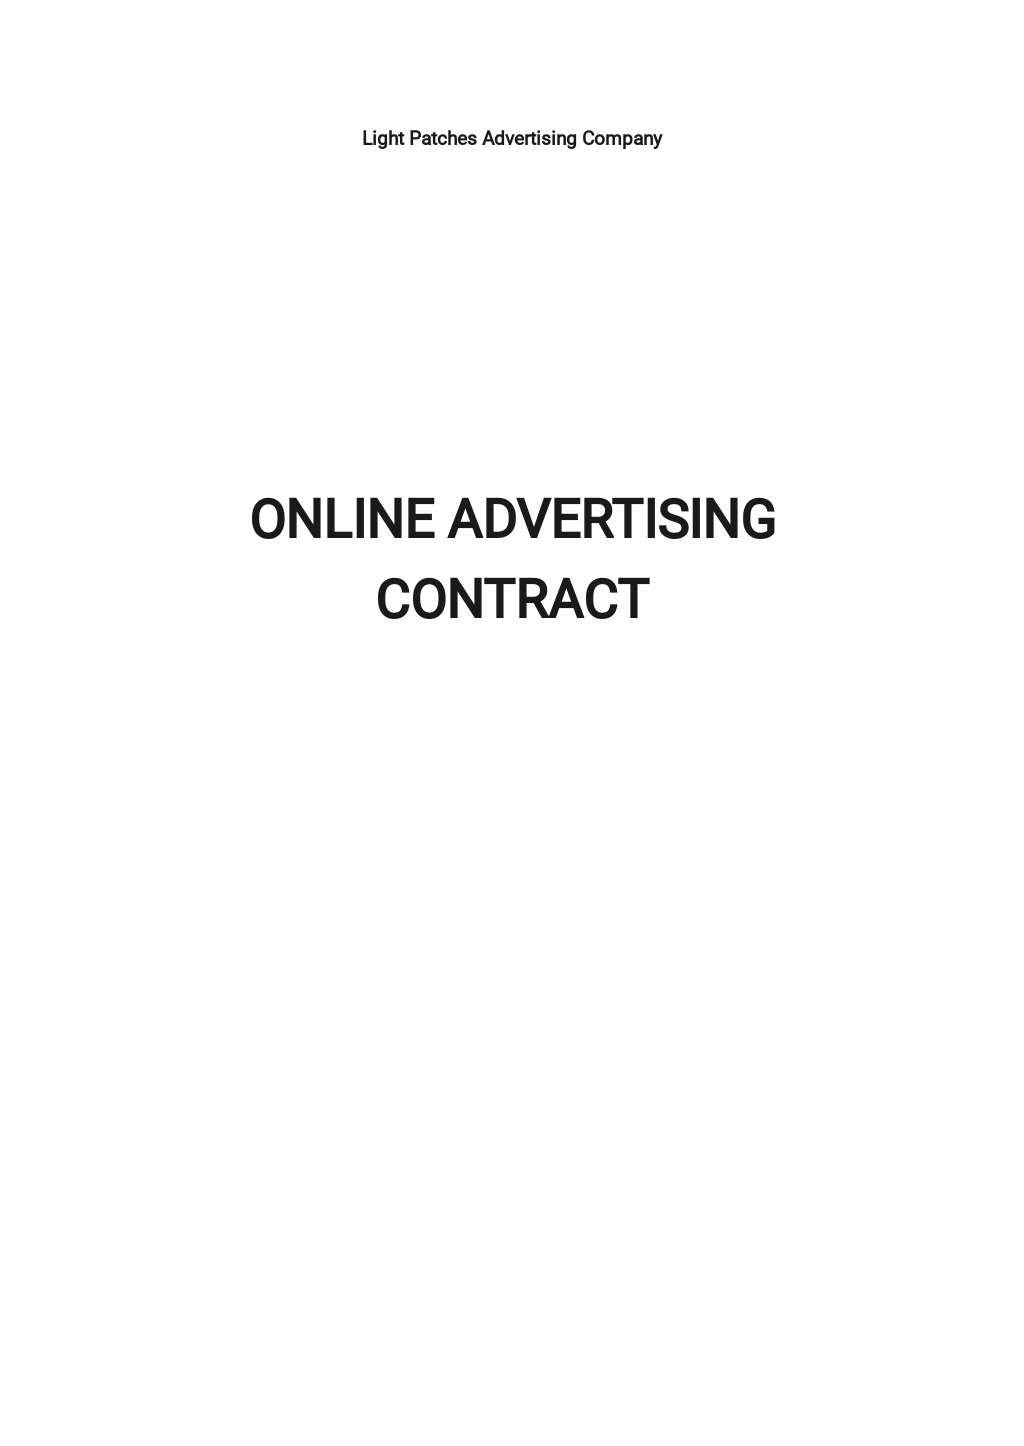 Online Advertising Contract Template - Google Docs, Word, Apple Pages